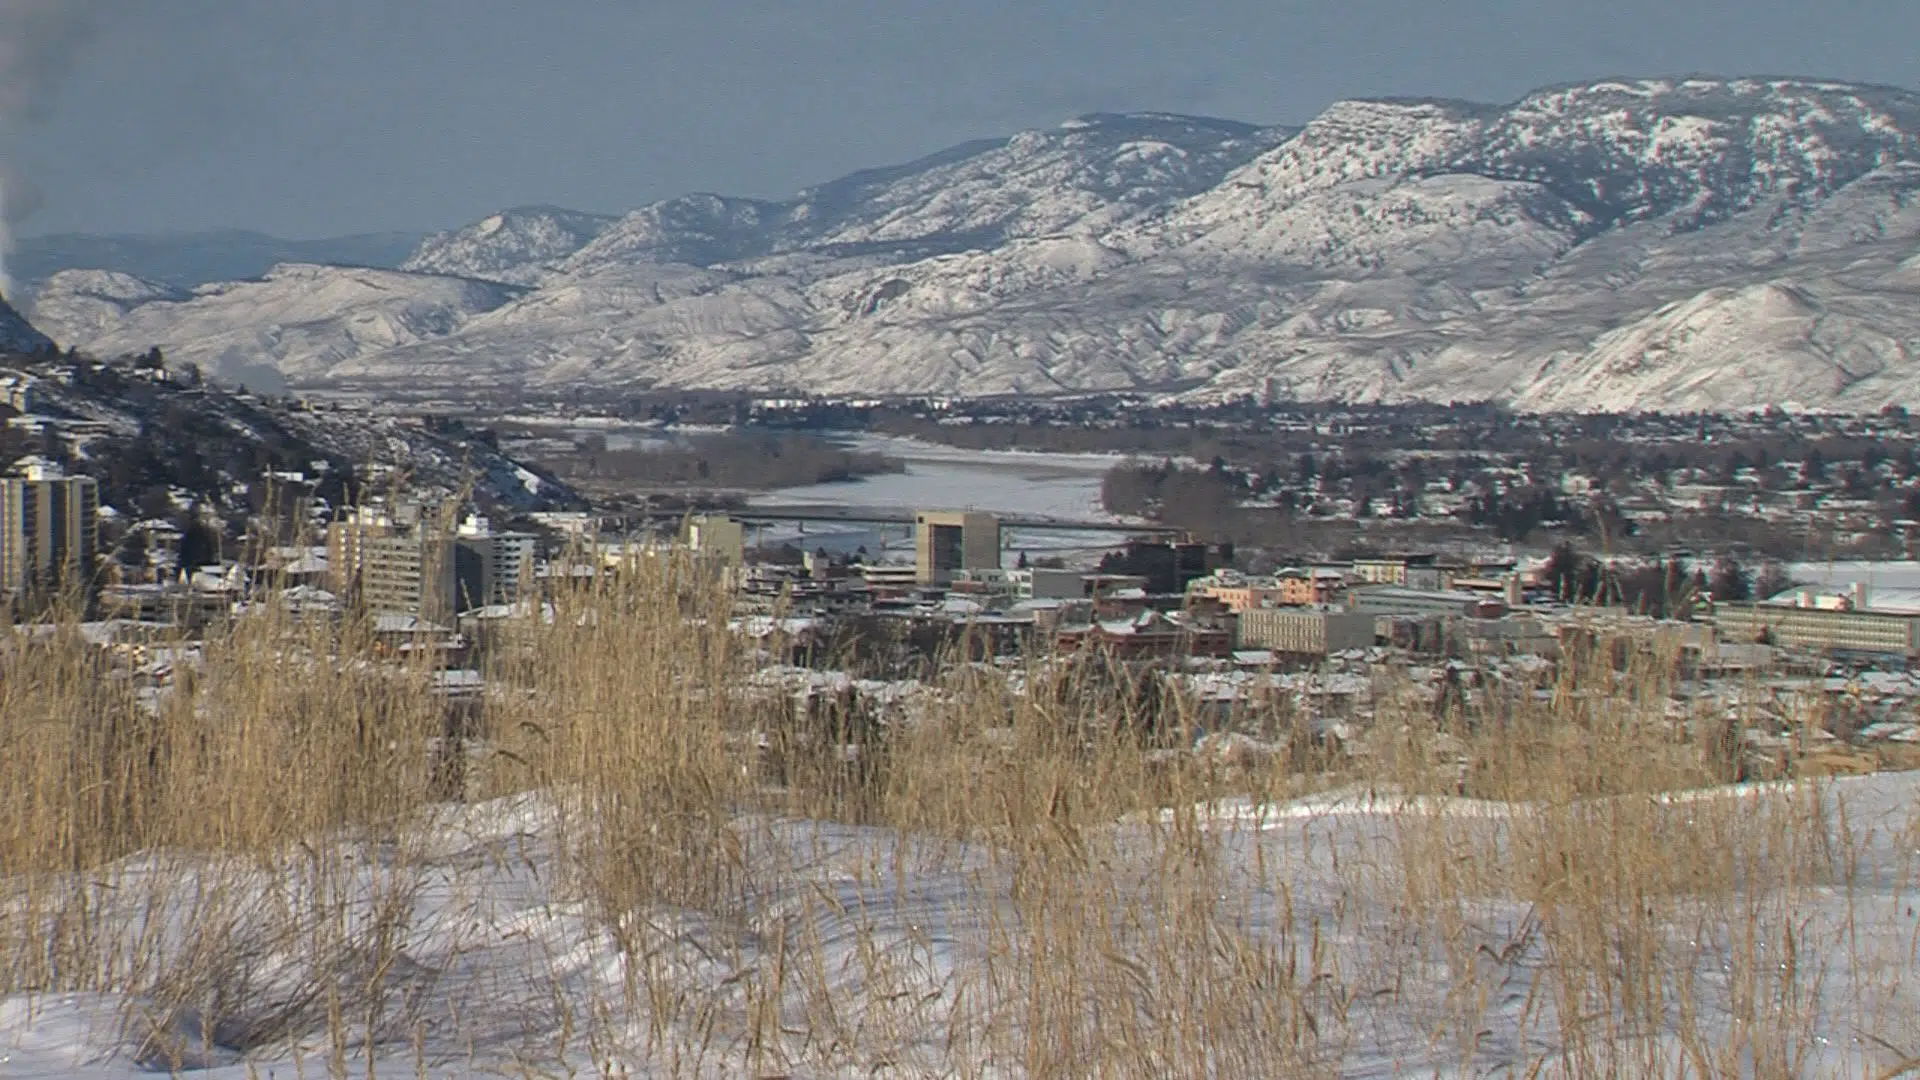 Kamloops population growth slightly lower than expected CFJC Today